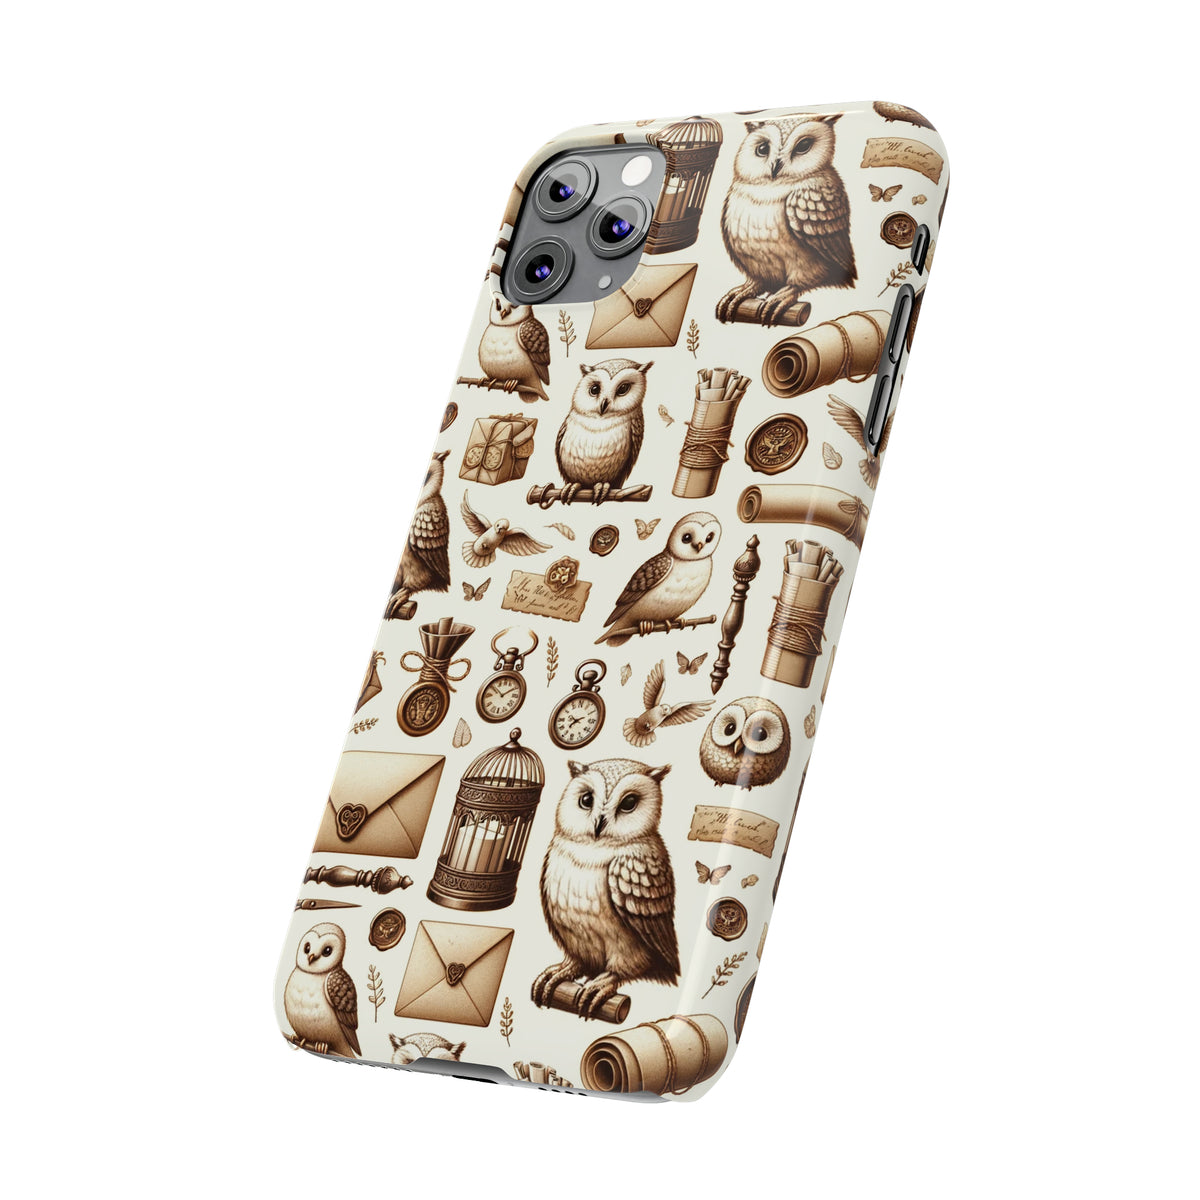 Old Owl and Letters in Wizard Phone Case